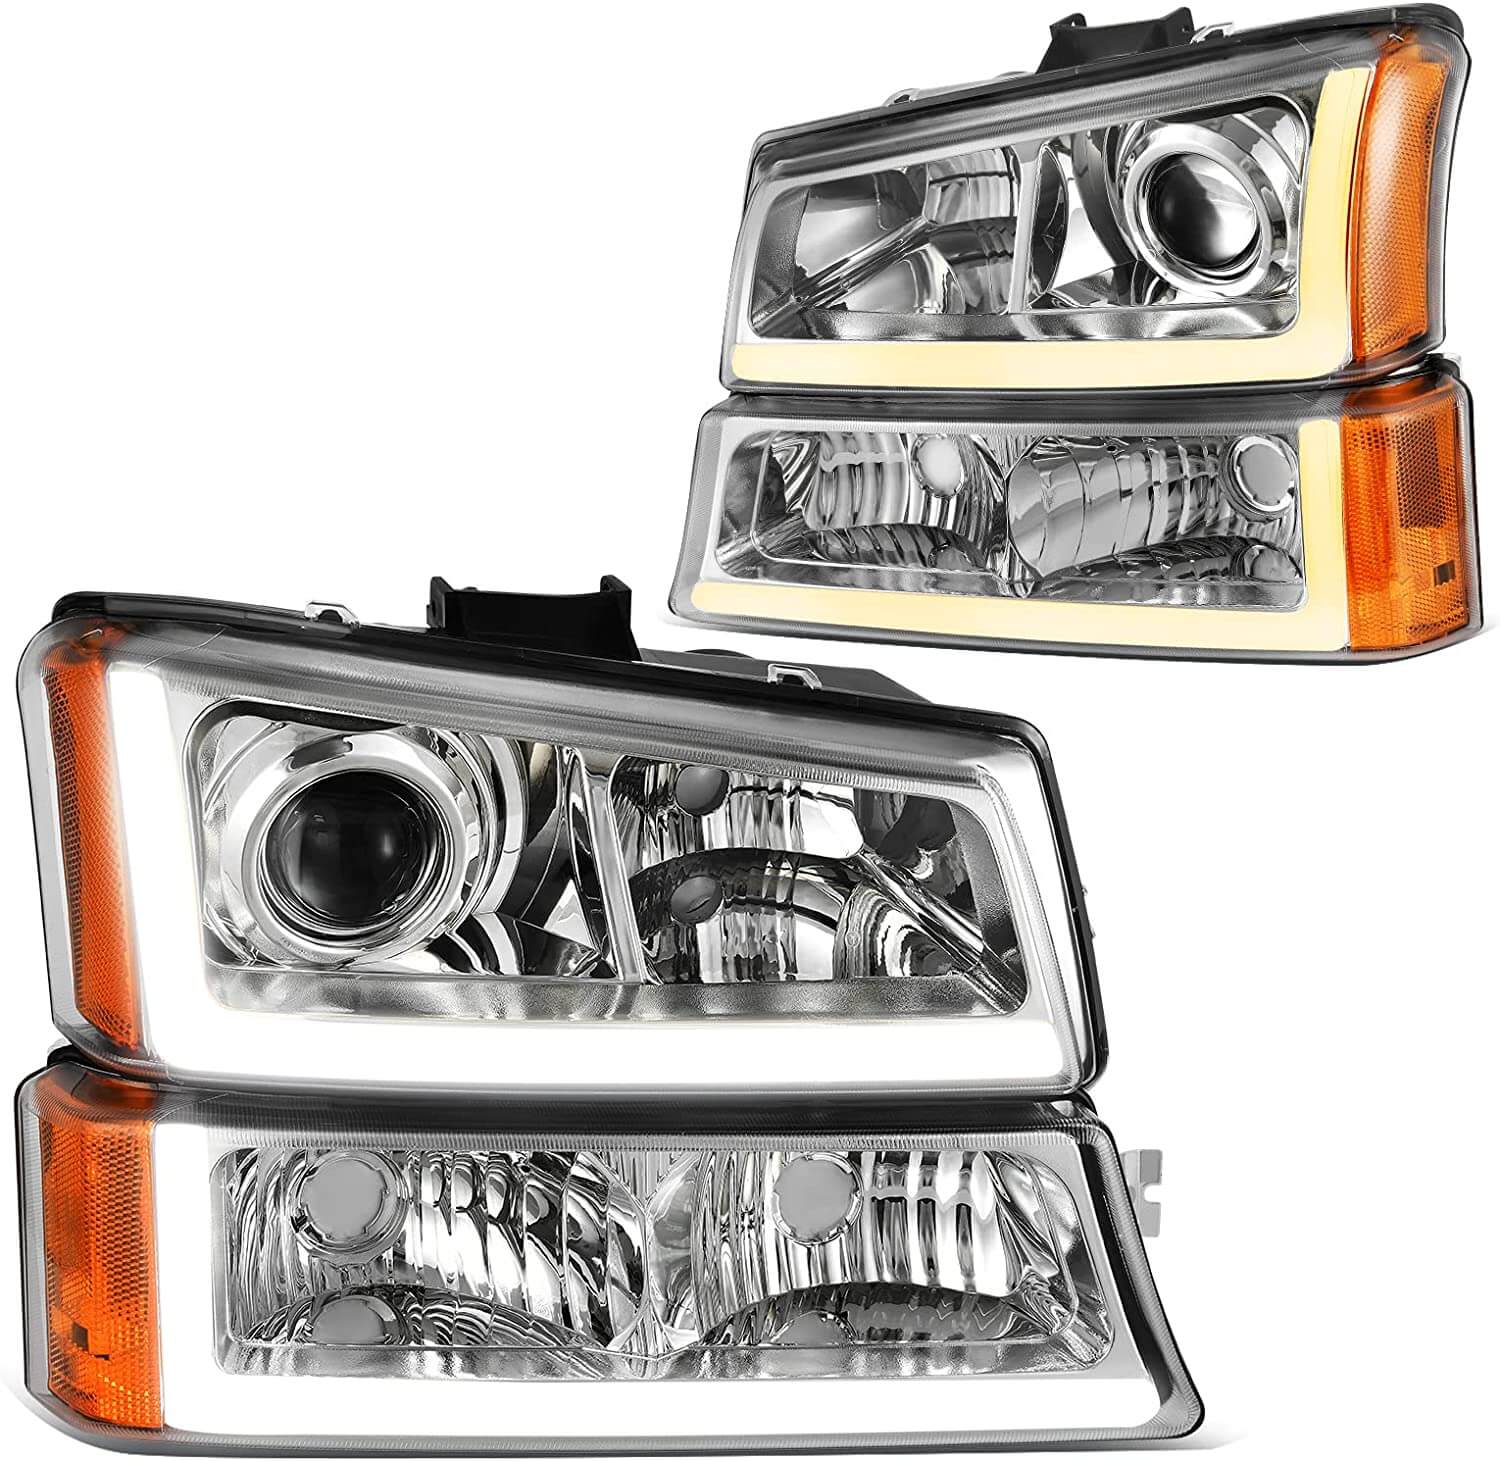 2003-2006 Chevy Silverado LED Headlights Assembly with Projector